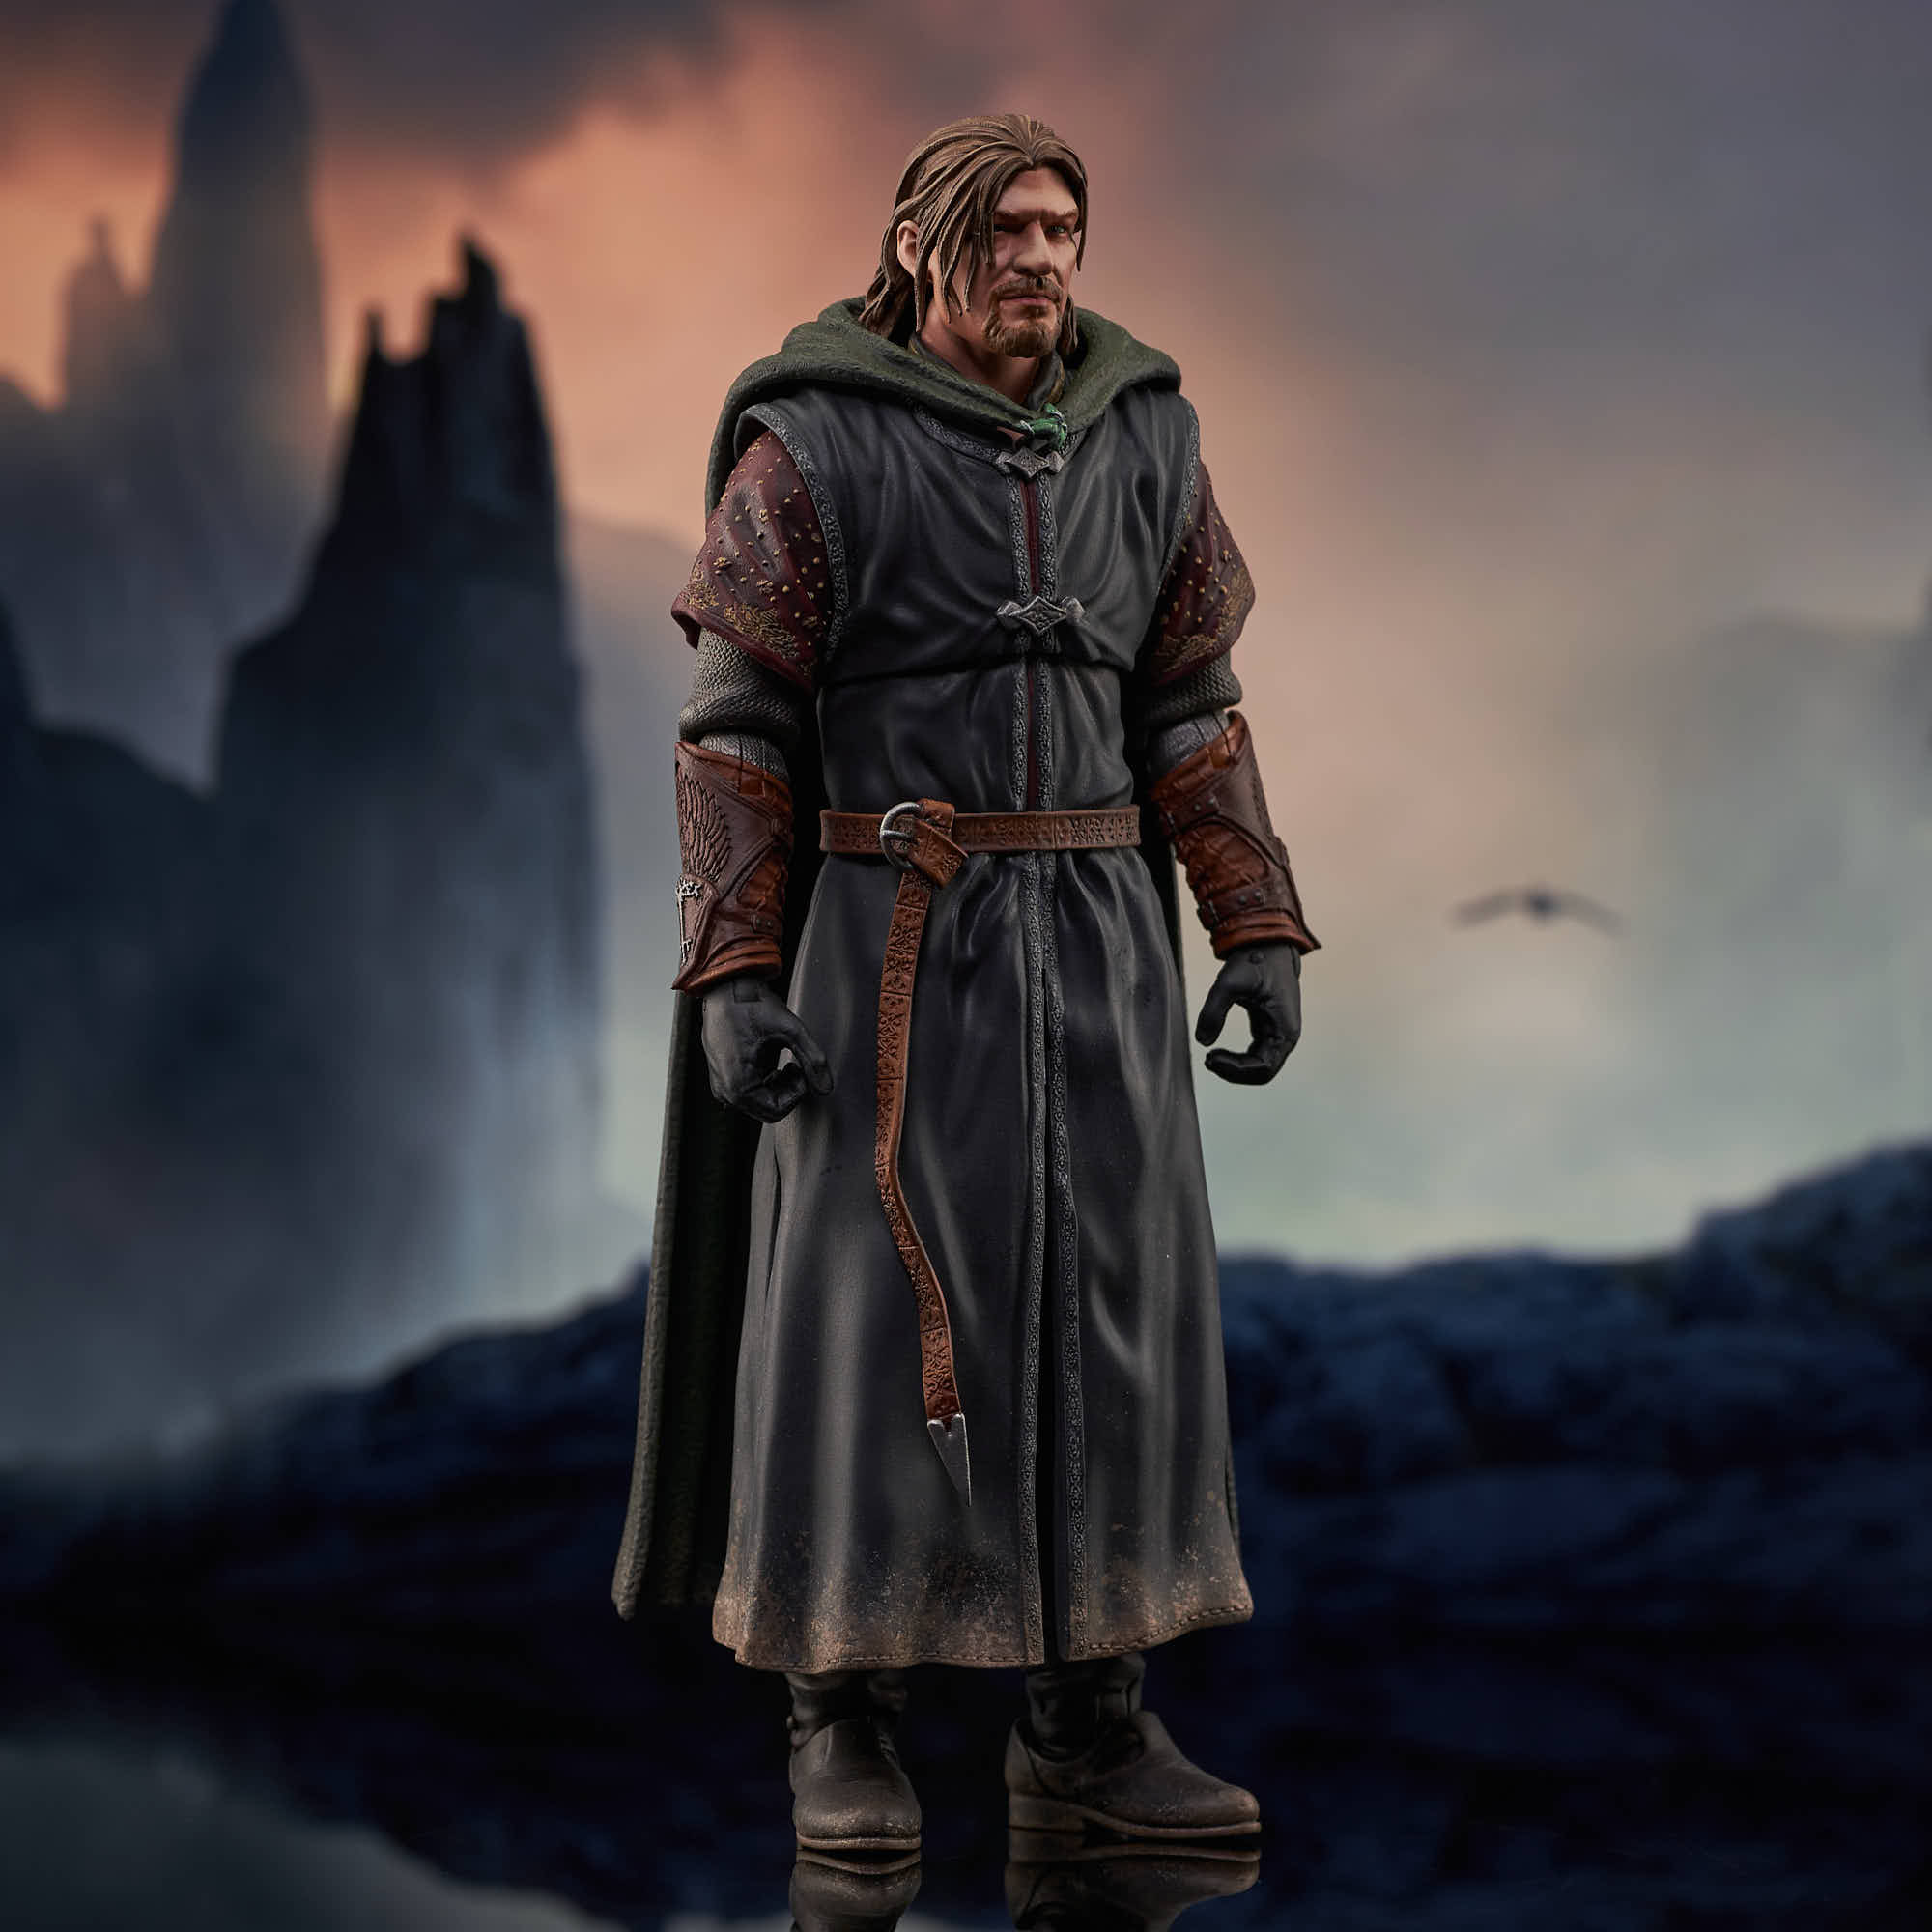 https://www.theonering.net/torwp/2023/01/18/116110-collecting-the-precious-preview-of-diamond-select-toys-boromir-and-lurtz/lotr_boromir_af_02/